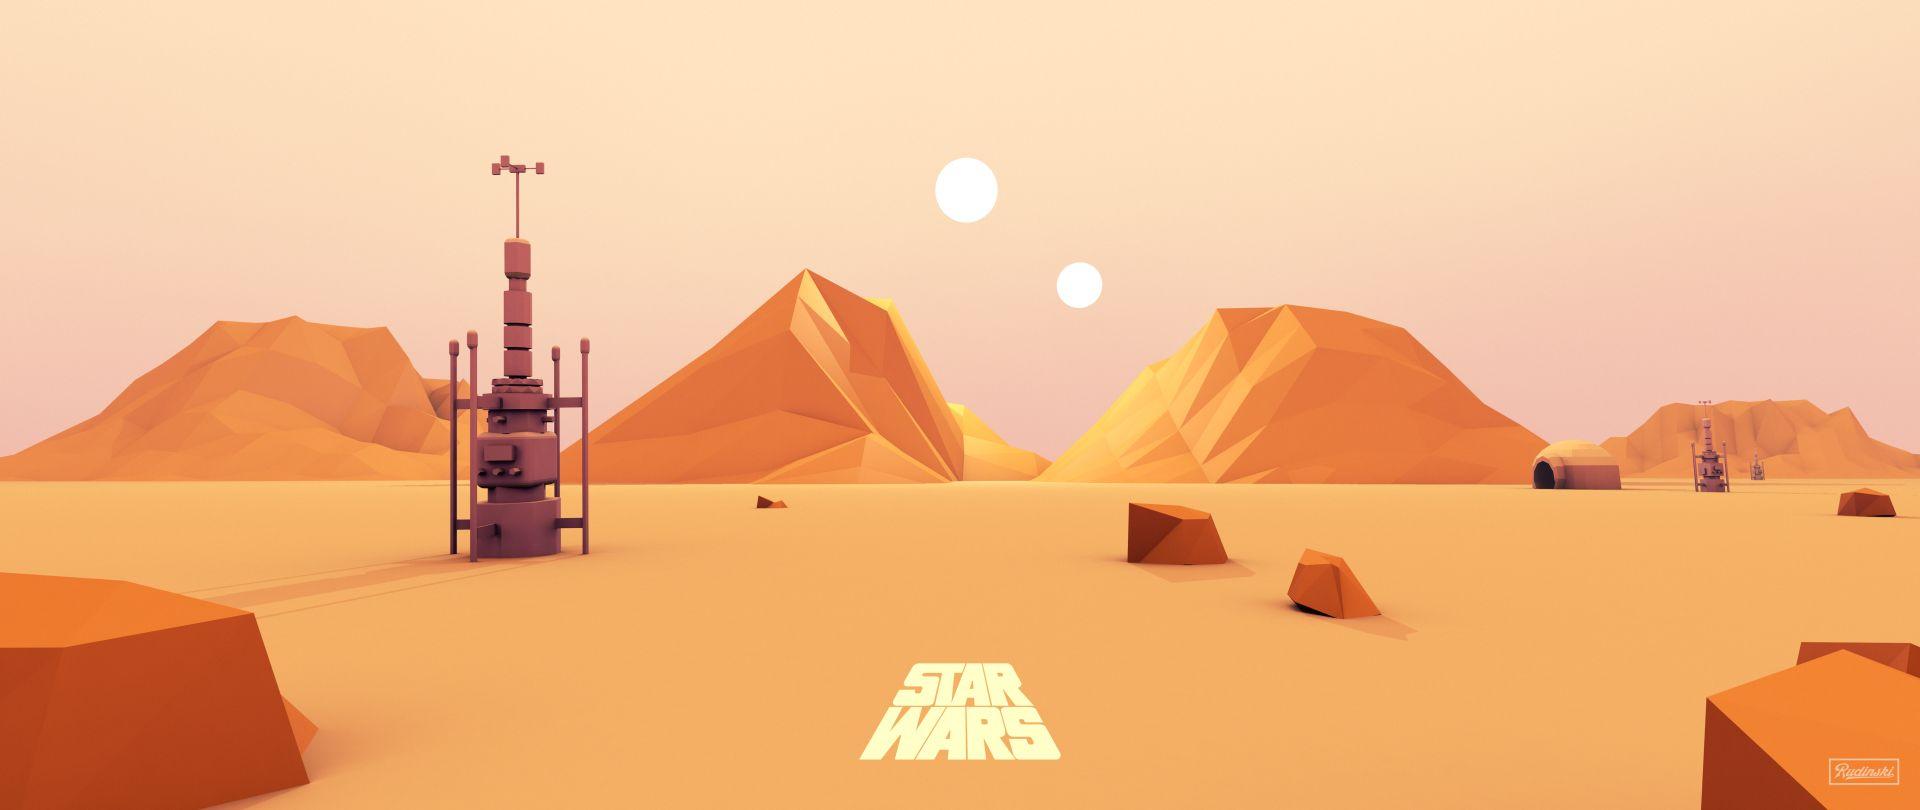 Made A Low Poly Tatooine Last Night For Fun